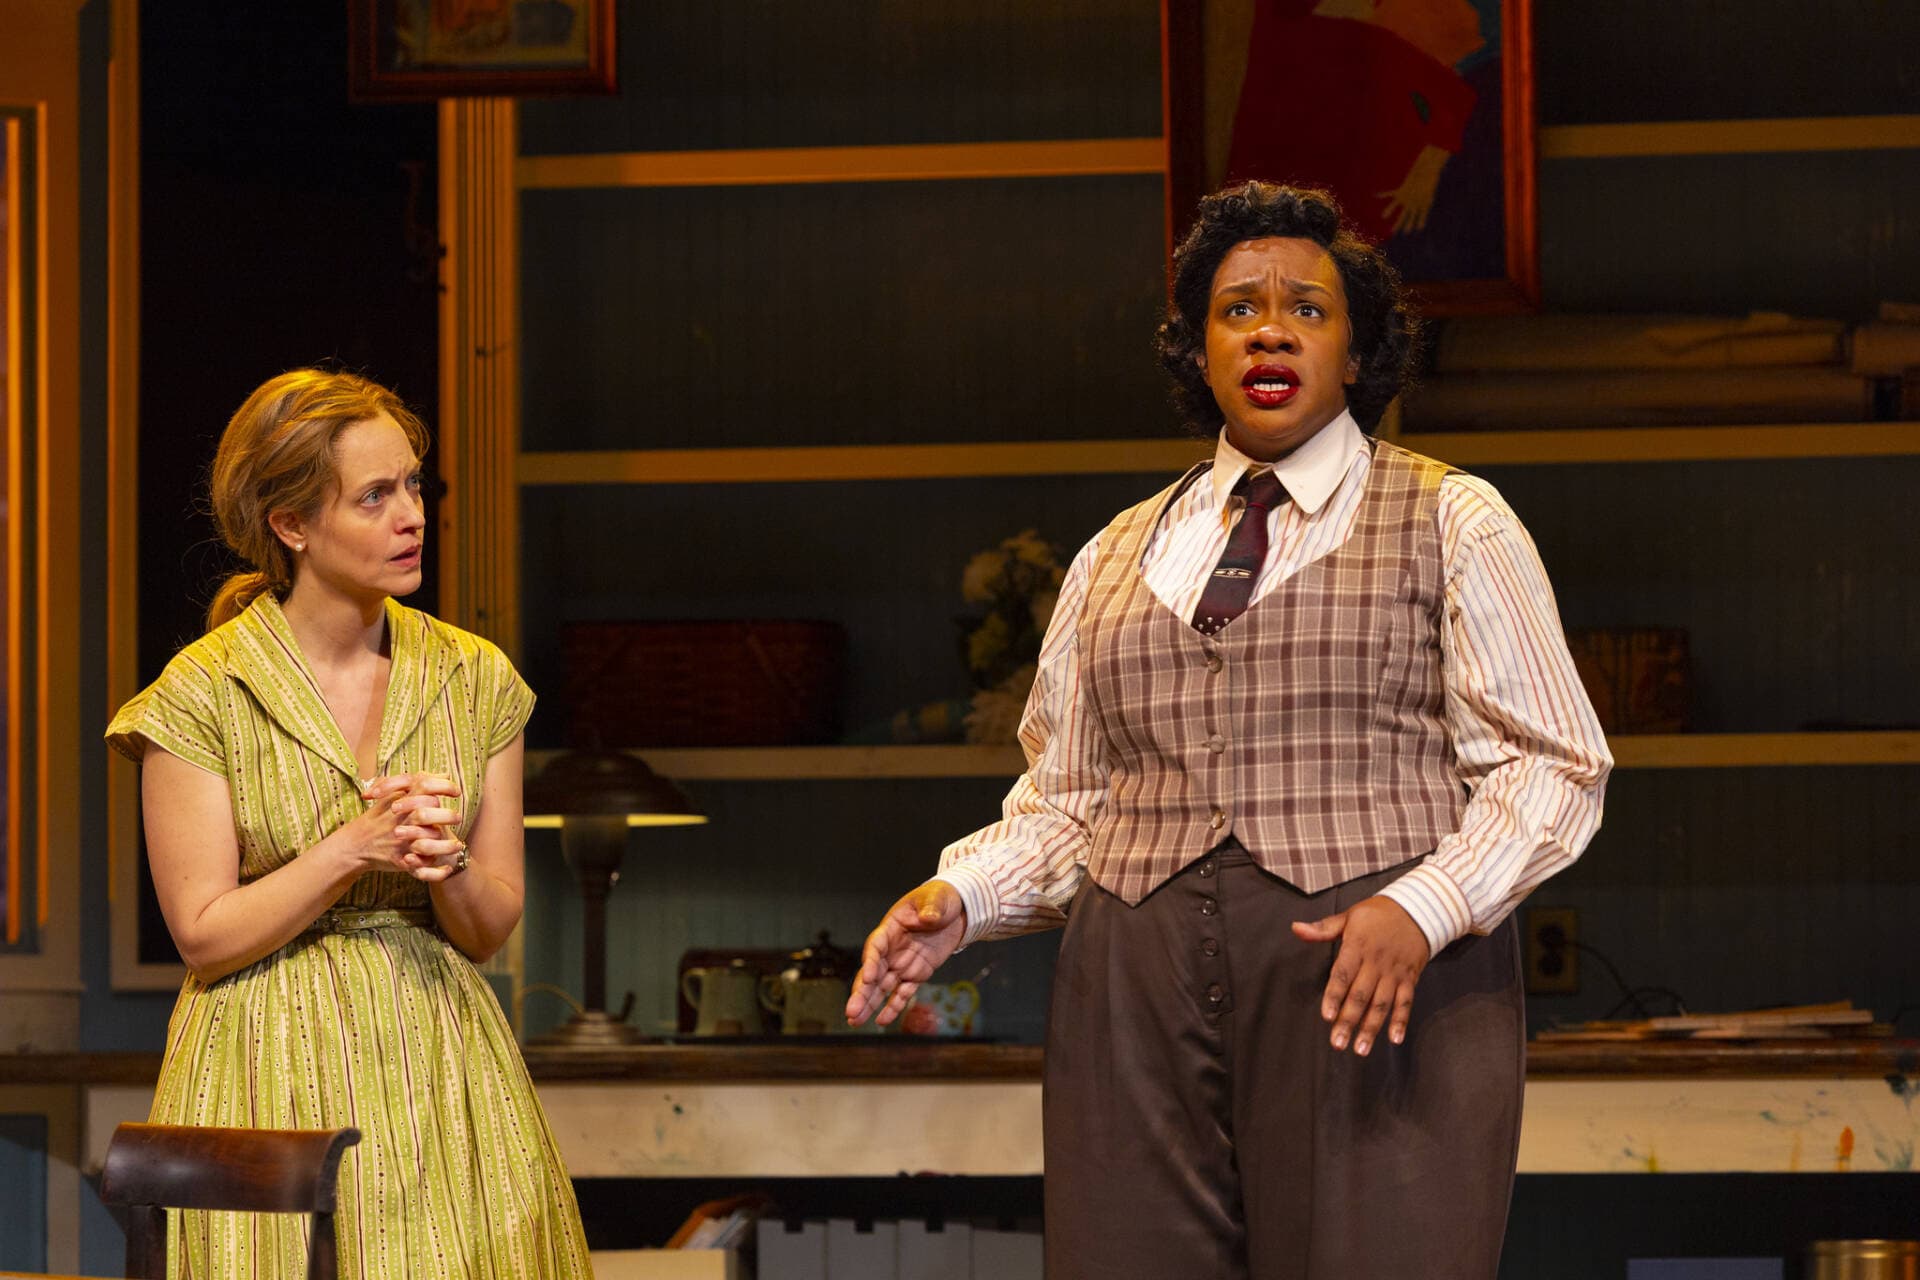 Stacy Fischer and Breezy Leigh in "Joy and Pandemic" at the Calderwood Pavilion. (Courtesy T Charles Erickson)